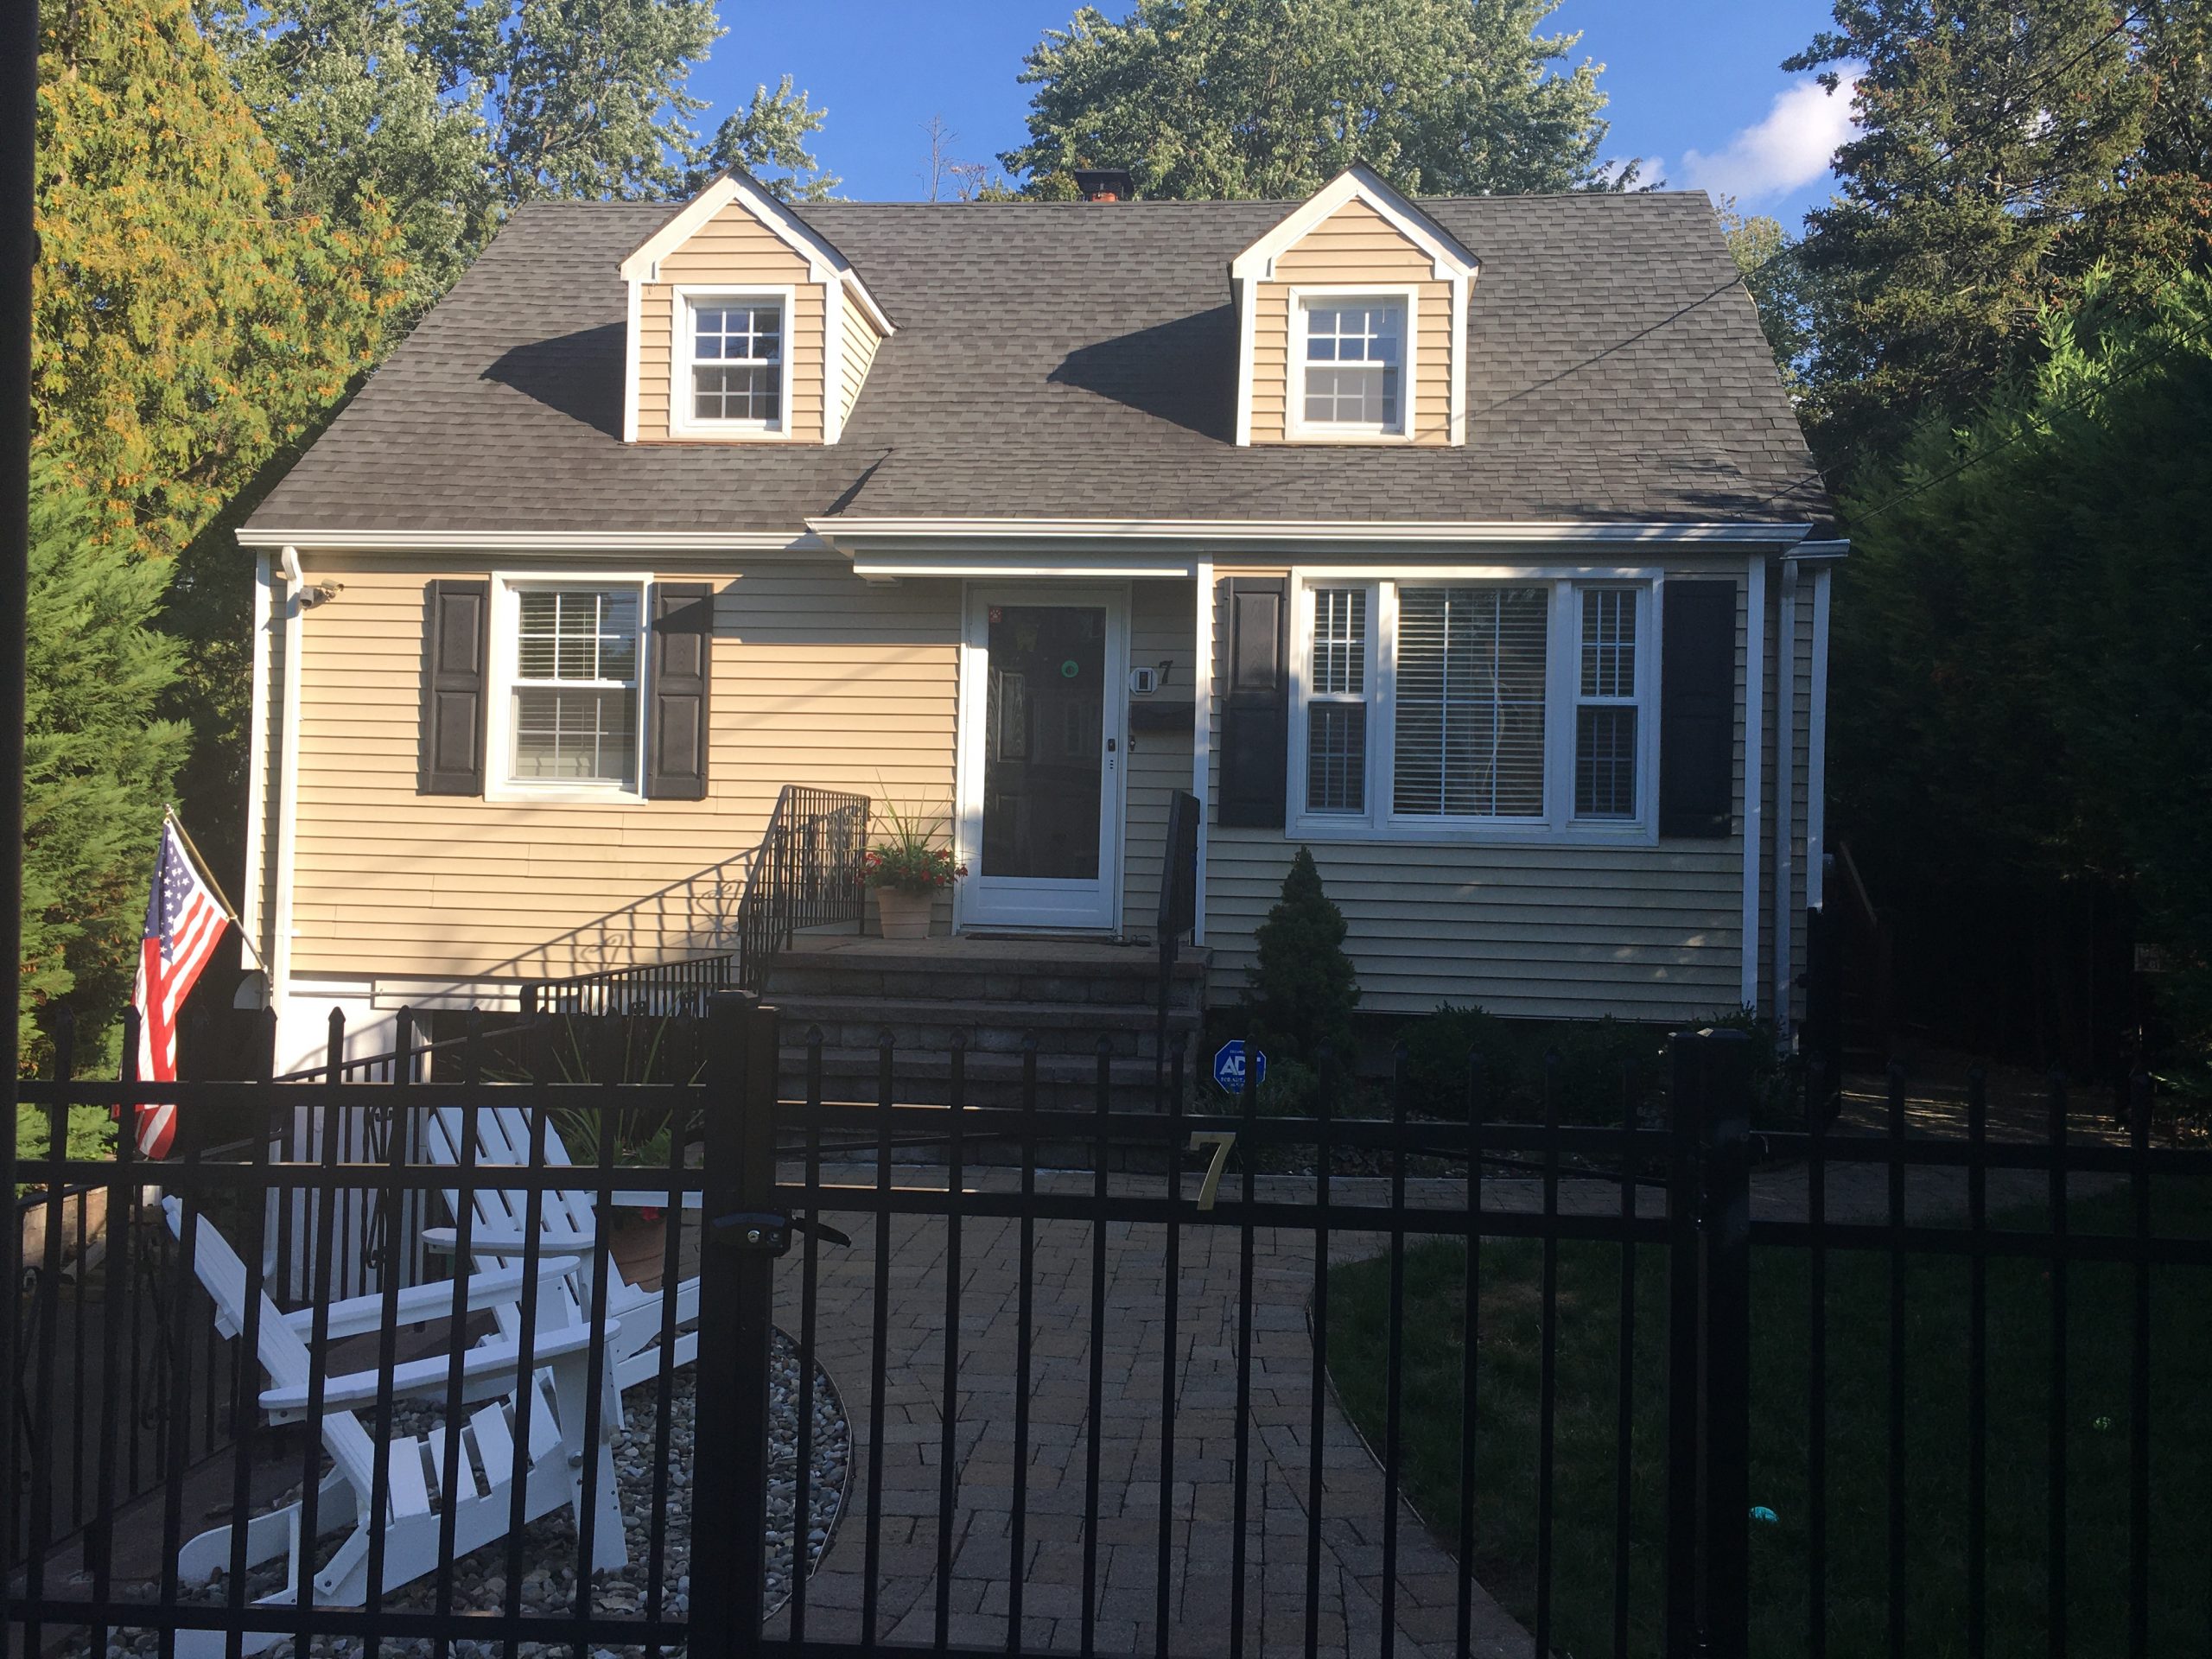 Cape Cod style home in Watchung, NJ before being repainted.